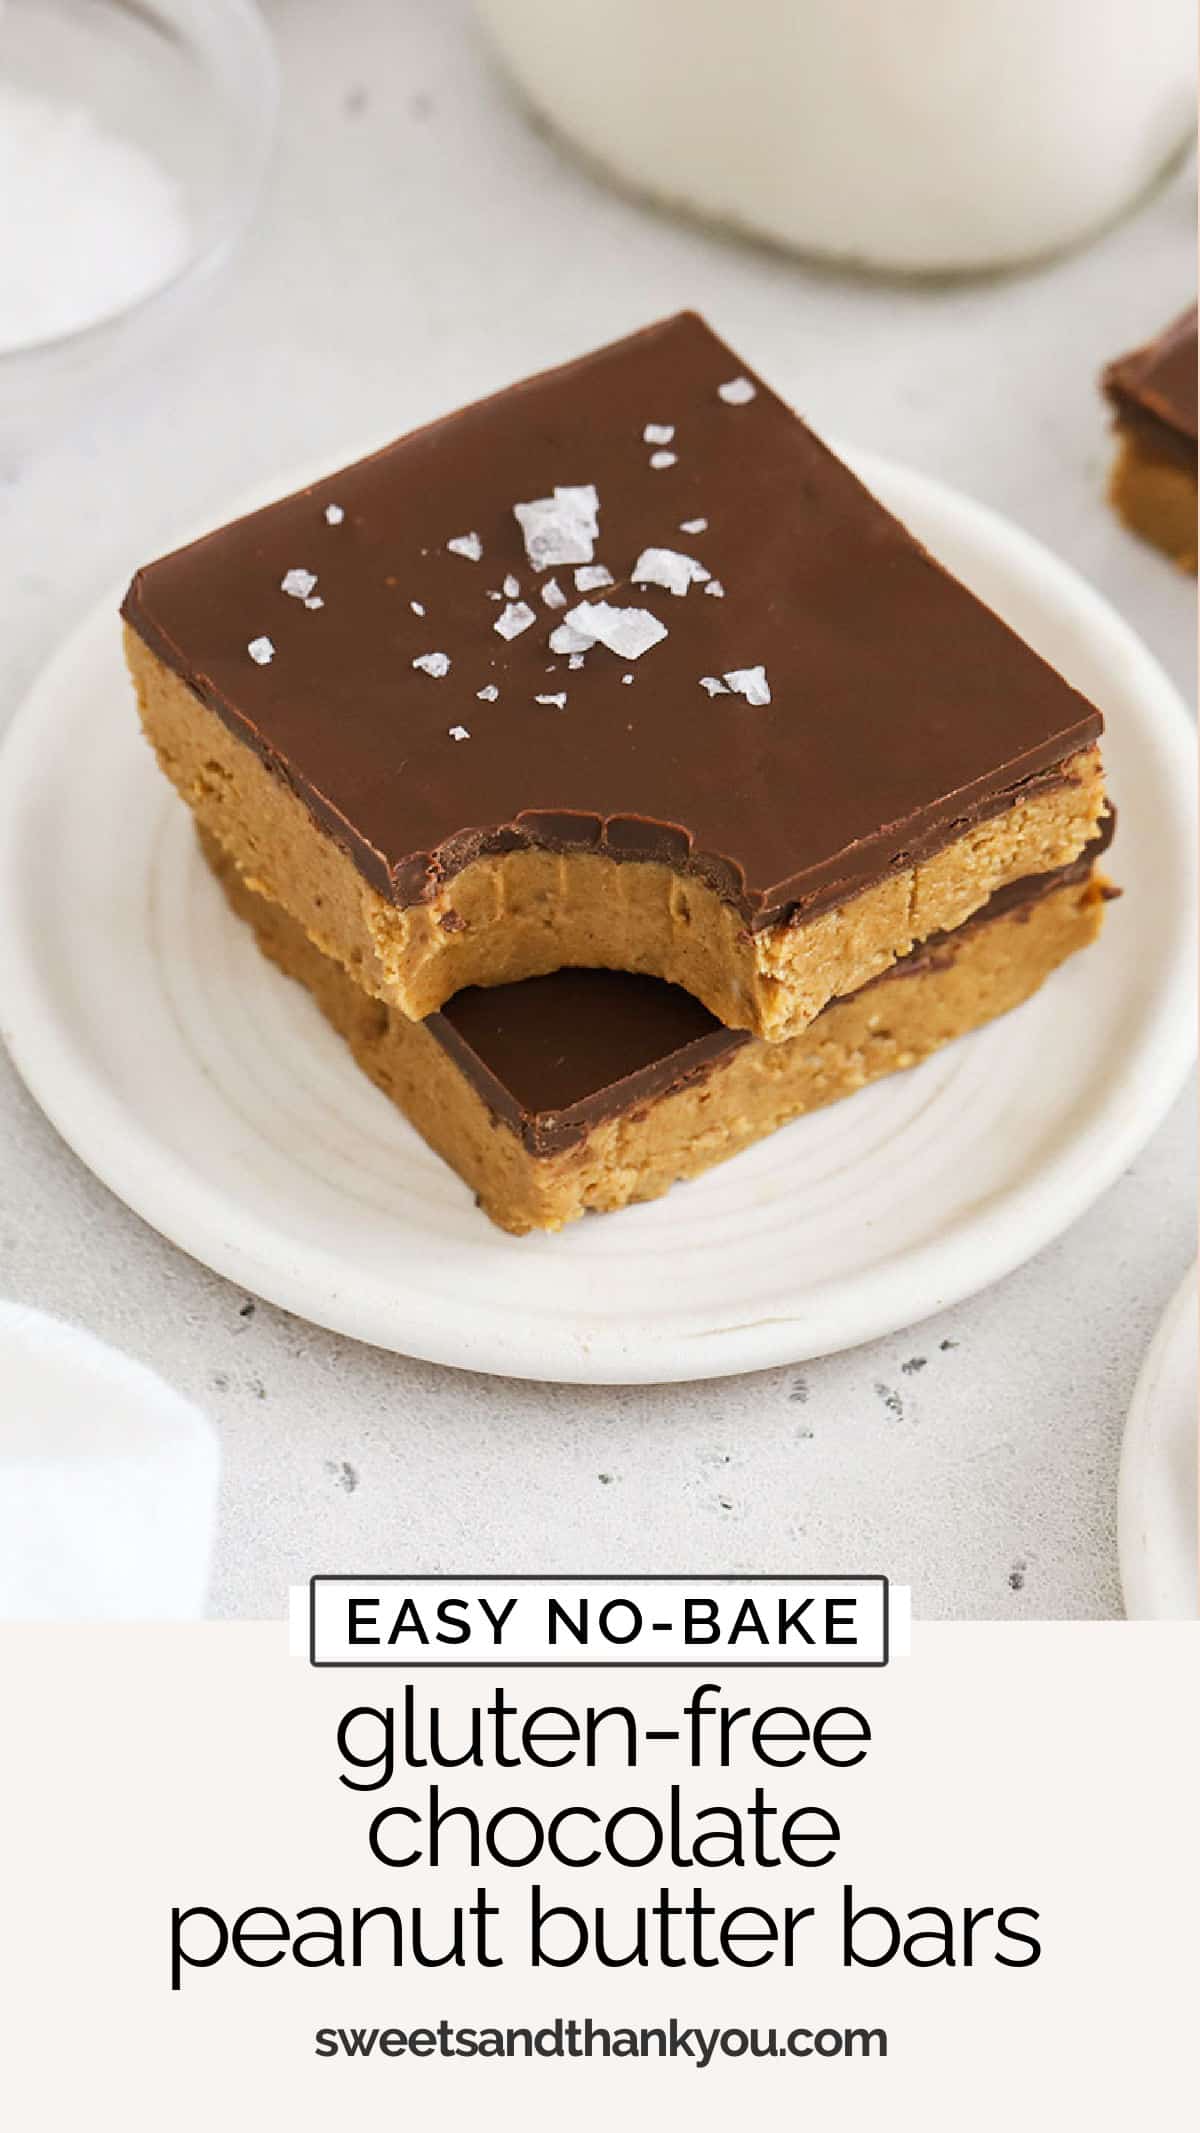 Let's make gluten-free lunch lady peanut butter bars! These no-bake gluten-free peanut butter bars are topped with a layer of chocolate for a delicious finish that's perfect for peanut butter lovers! / gluten free chocolate peanut butter bars / gluten free no bake peanut butter bars / gluten free no bake chocolate peanut butter bars recipe / no bake gluten free dessert / no bake gluten free treat / easy gluten free dessert recipe /